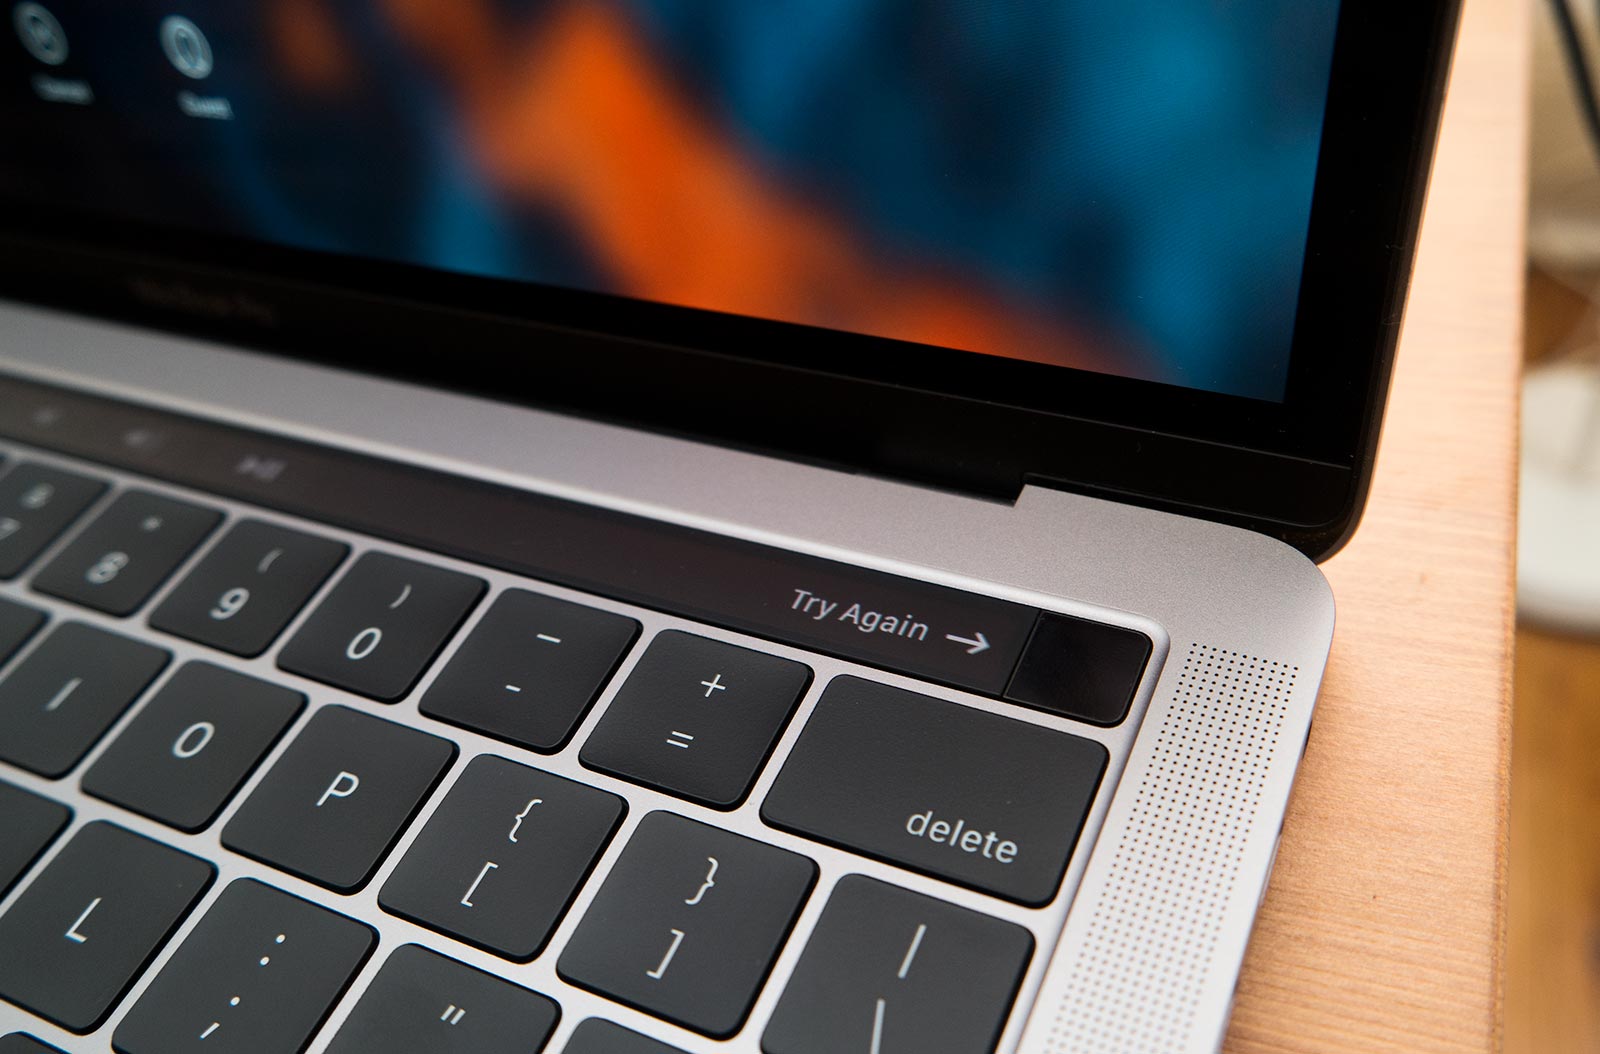 MacBook Pro 13 reviewed with the Touch Bar in 2016